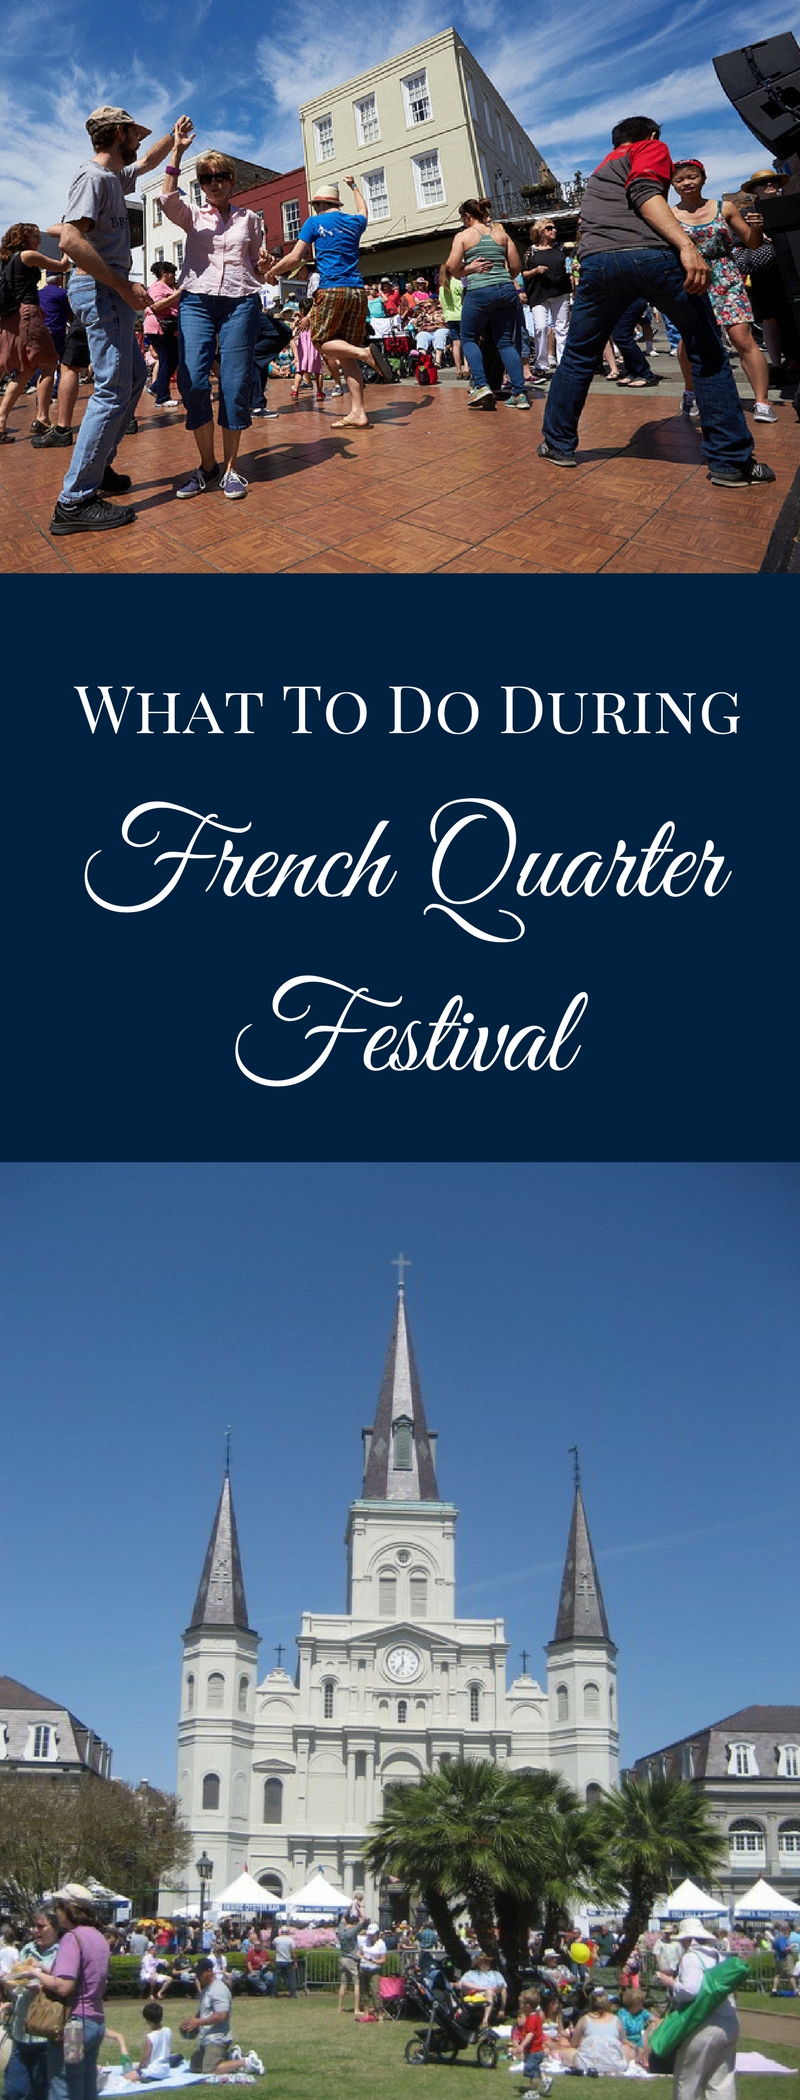 From Thursday, April 6 through Sunday, April 9, 2017 French Quarter Festival will celebrate with a huge free festival in New Orleans’ oldest neighborhood.